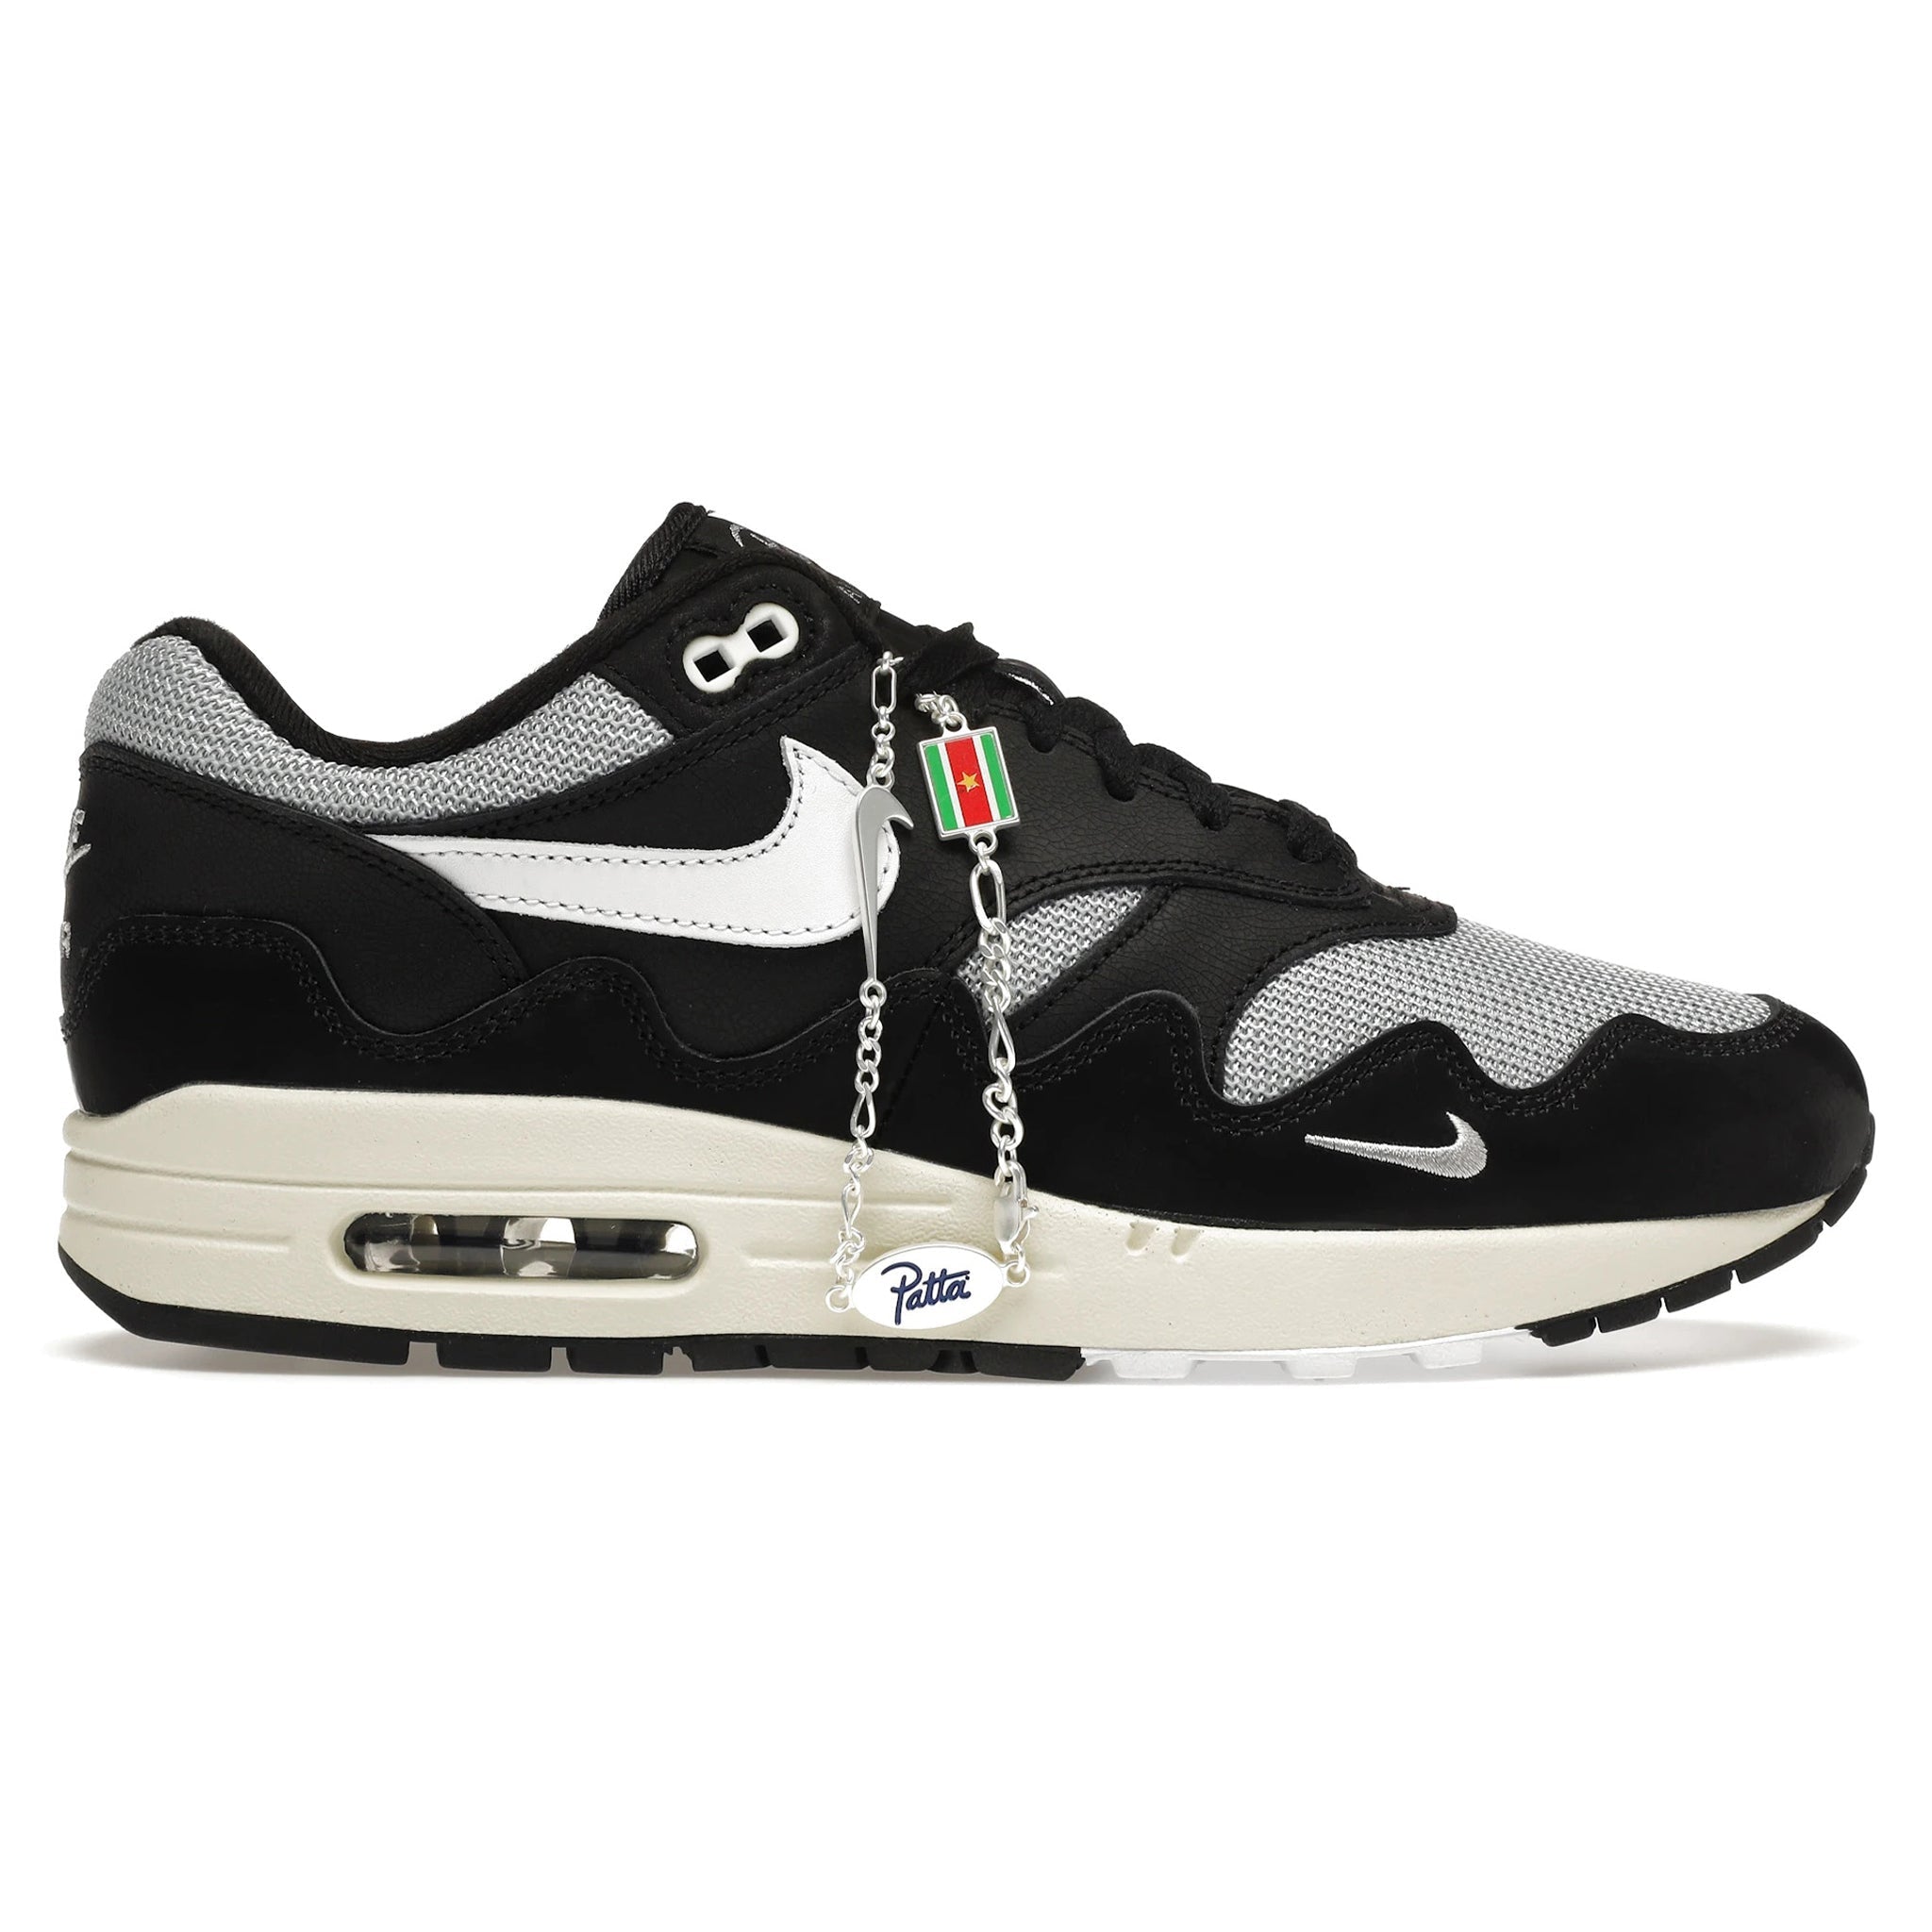 Image of Nike Air Max 1 Patta Waves Black (With Bracelet)